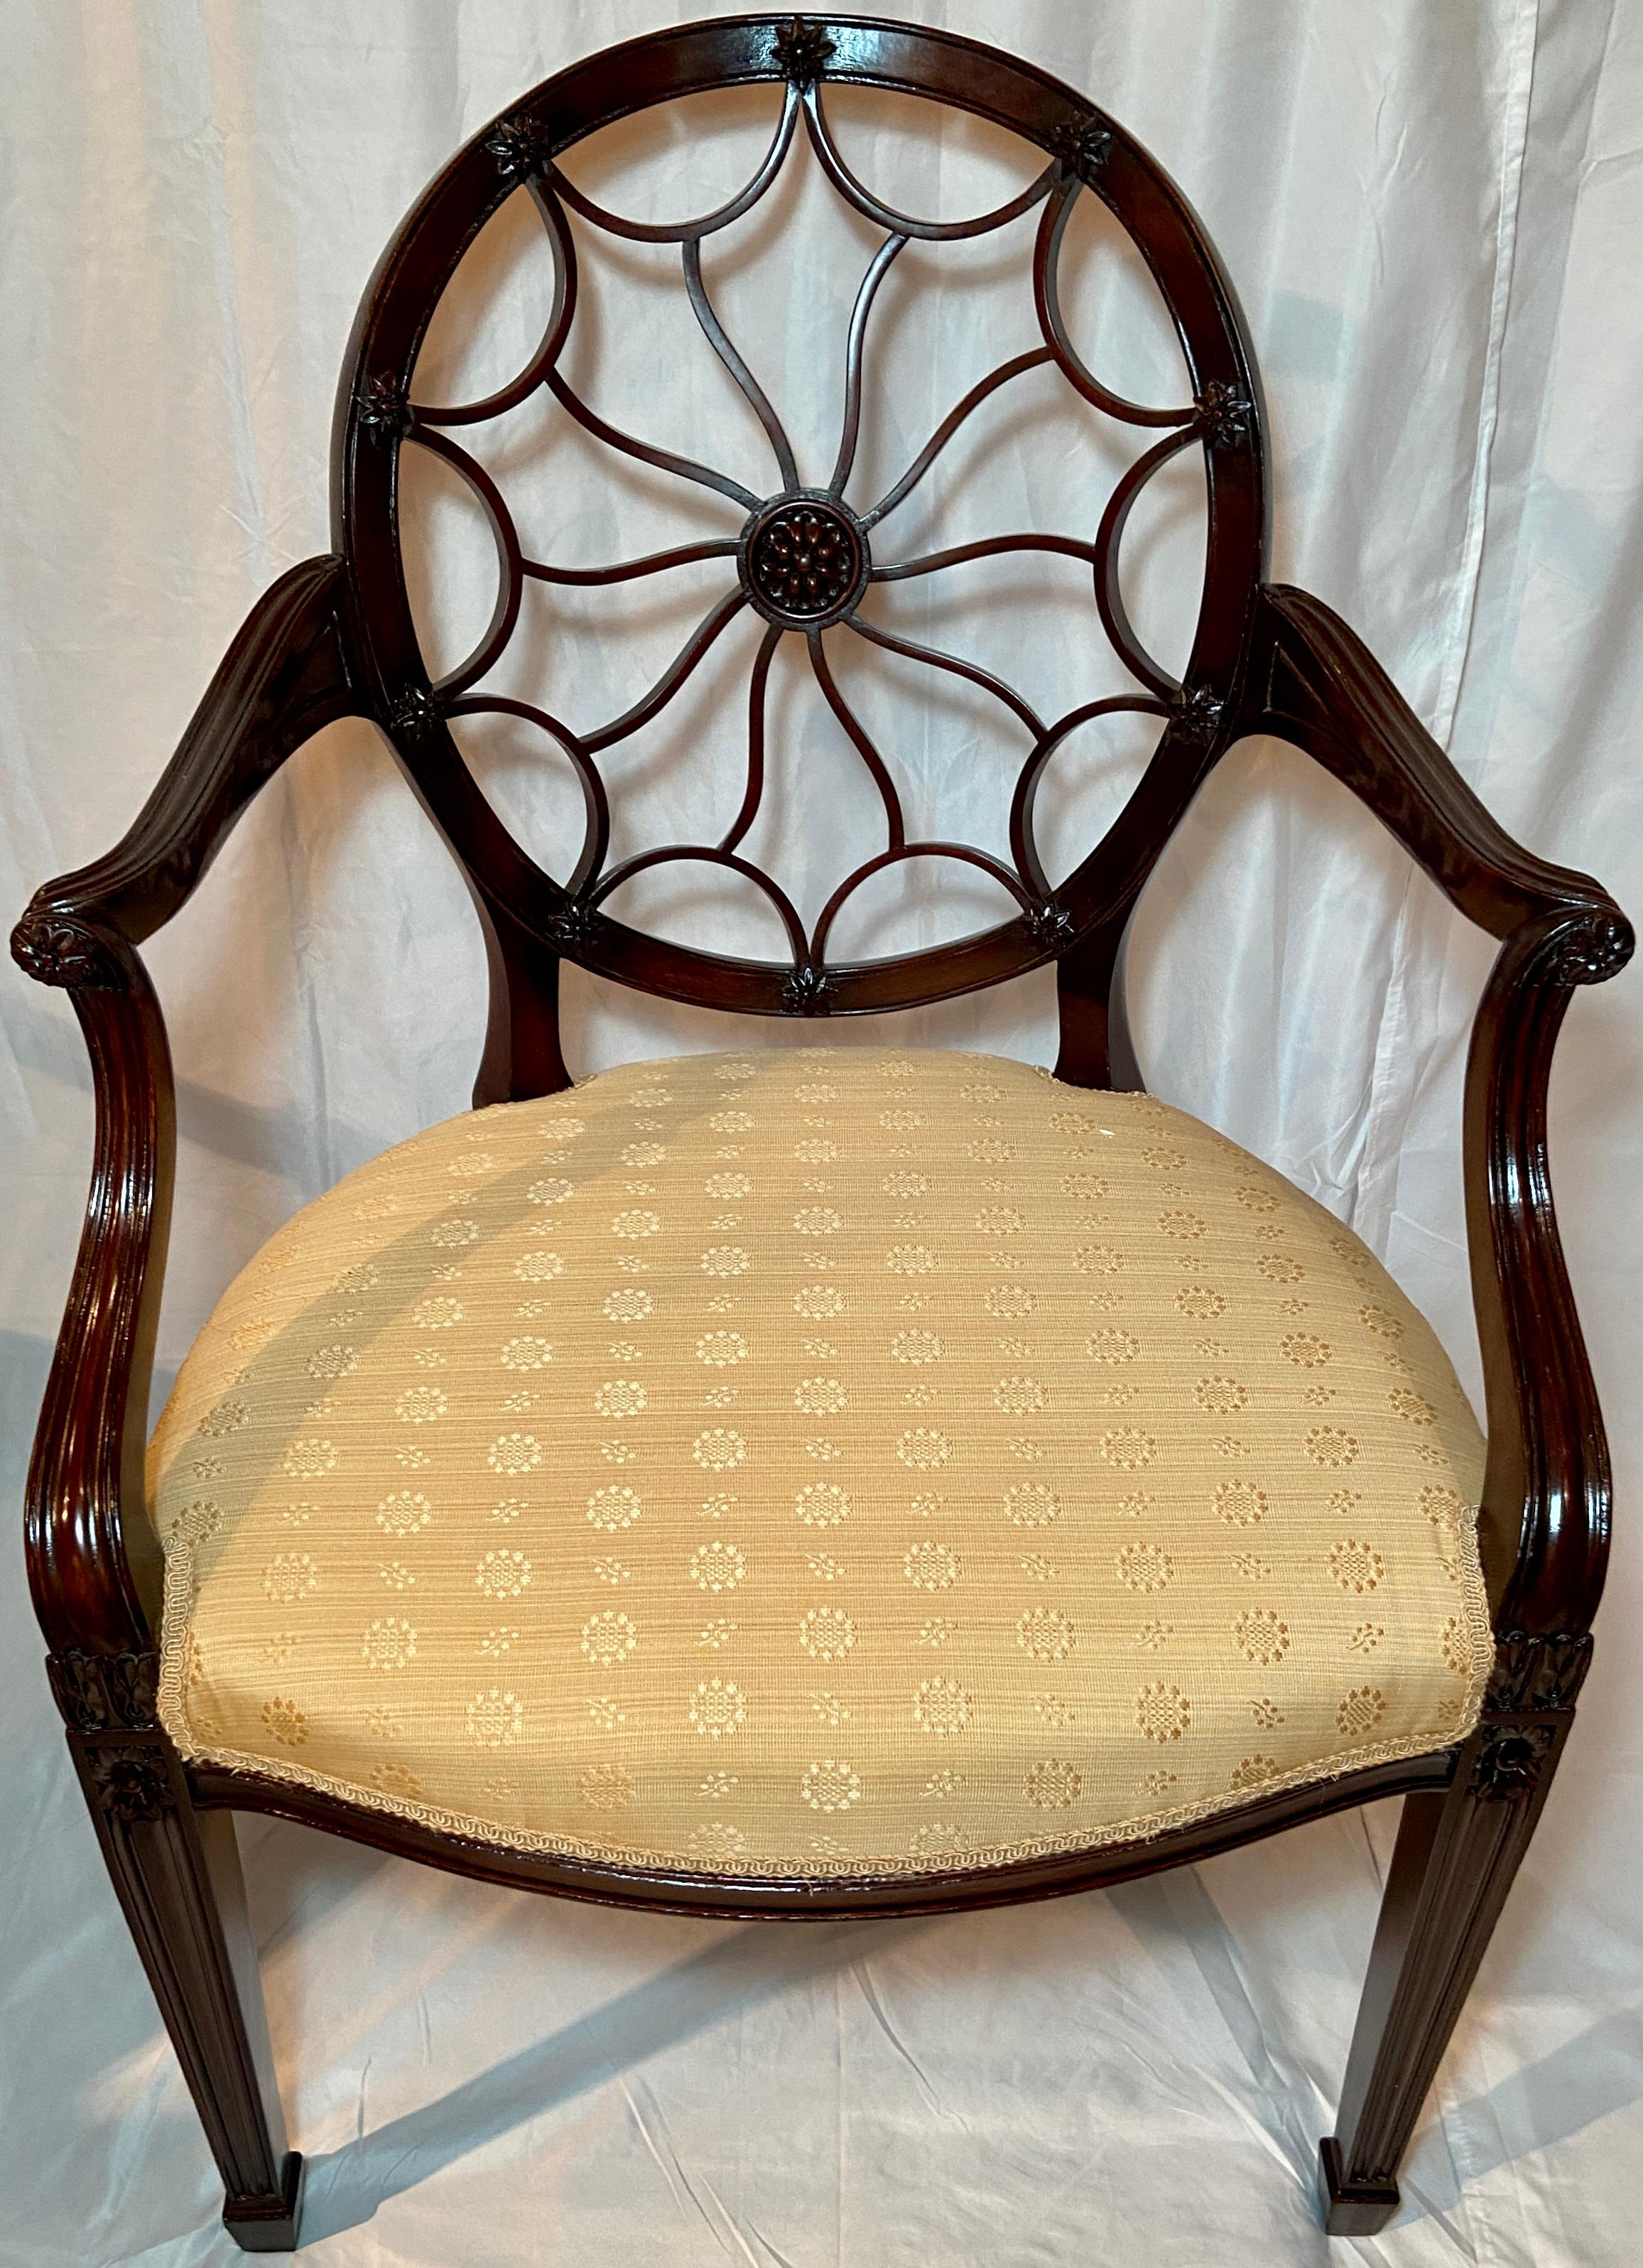 Pair Antique English Mahogany Round-Back Armchairs with Yellow Upholstery, Circa 1865-1885.